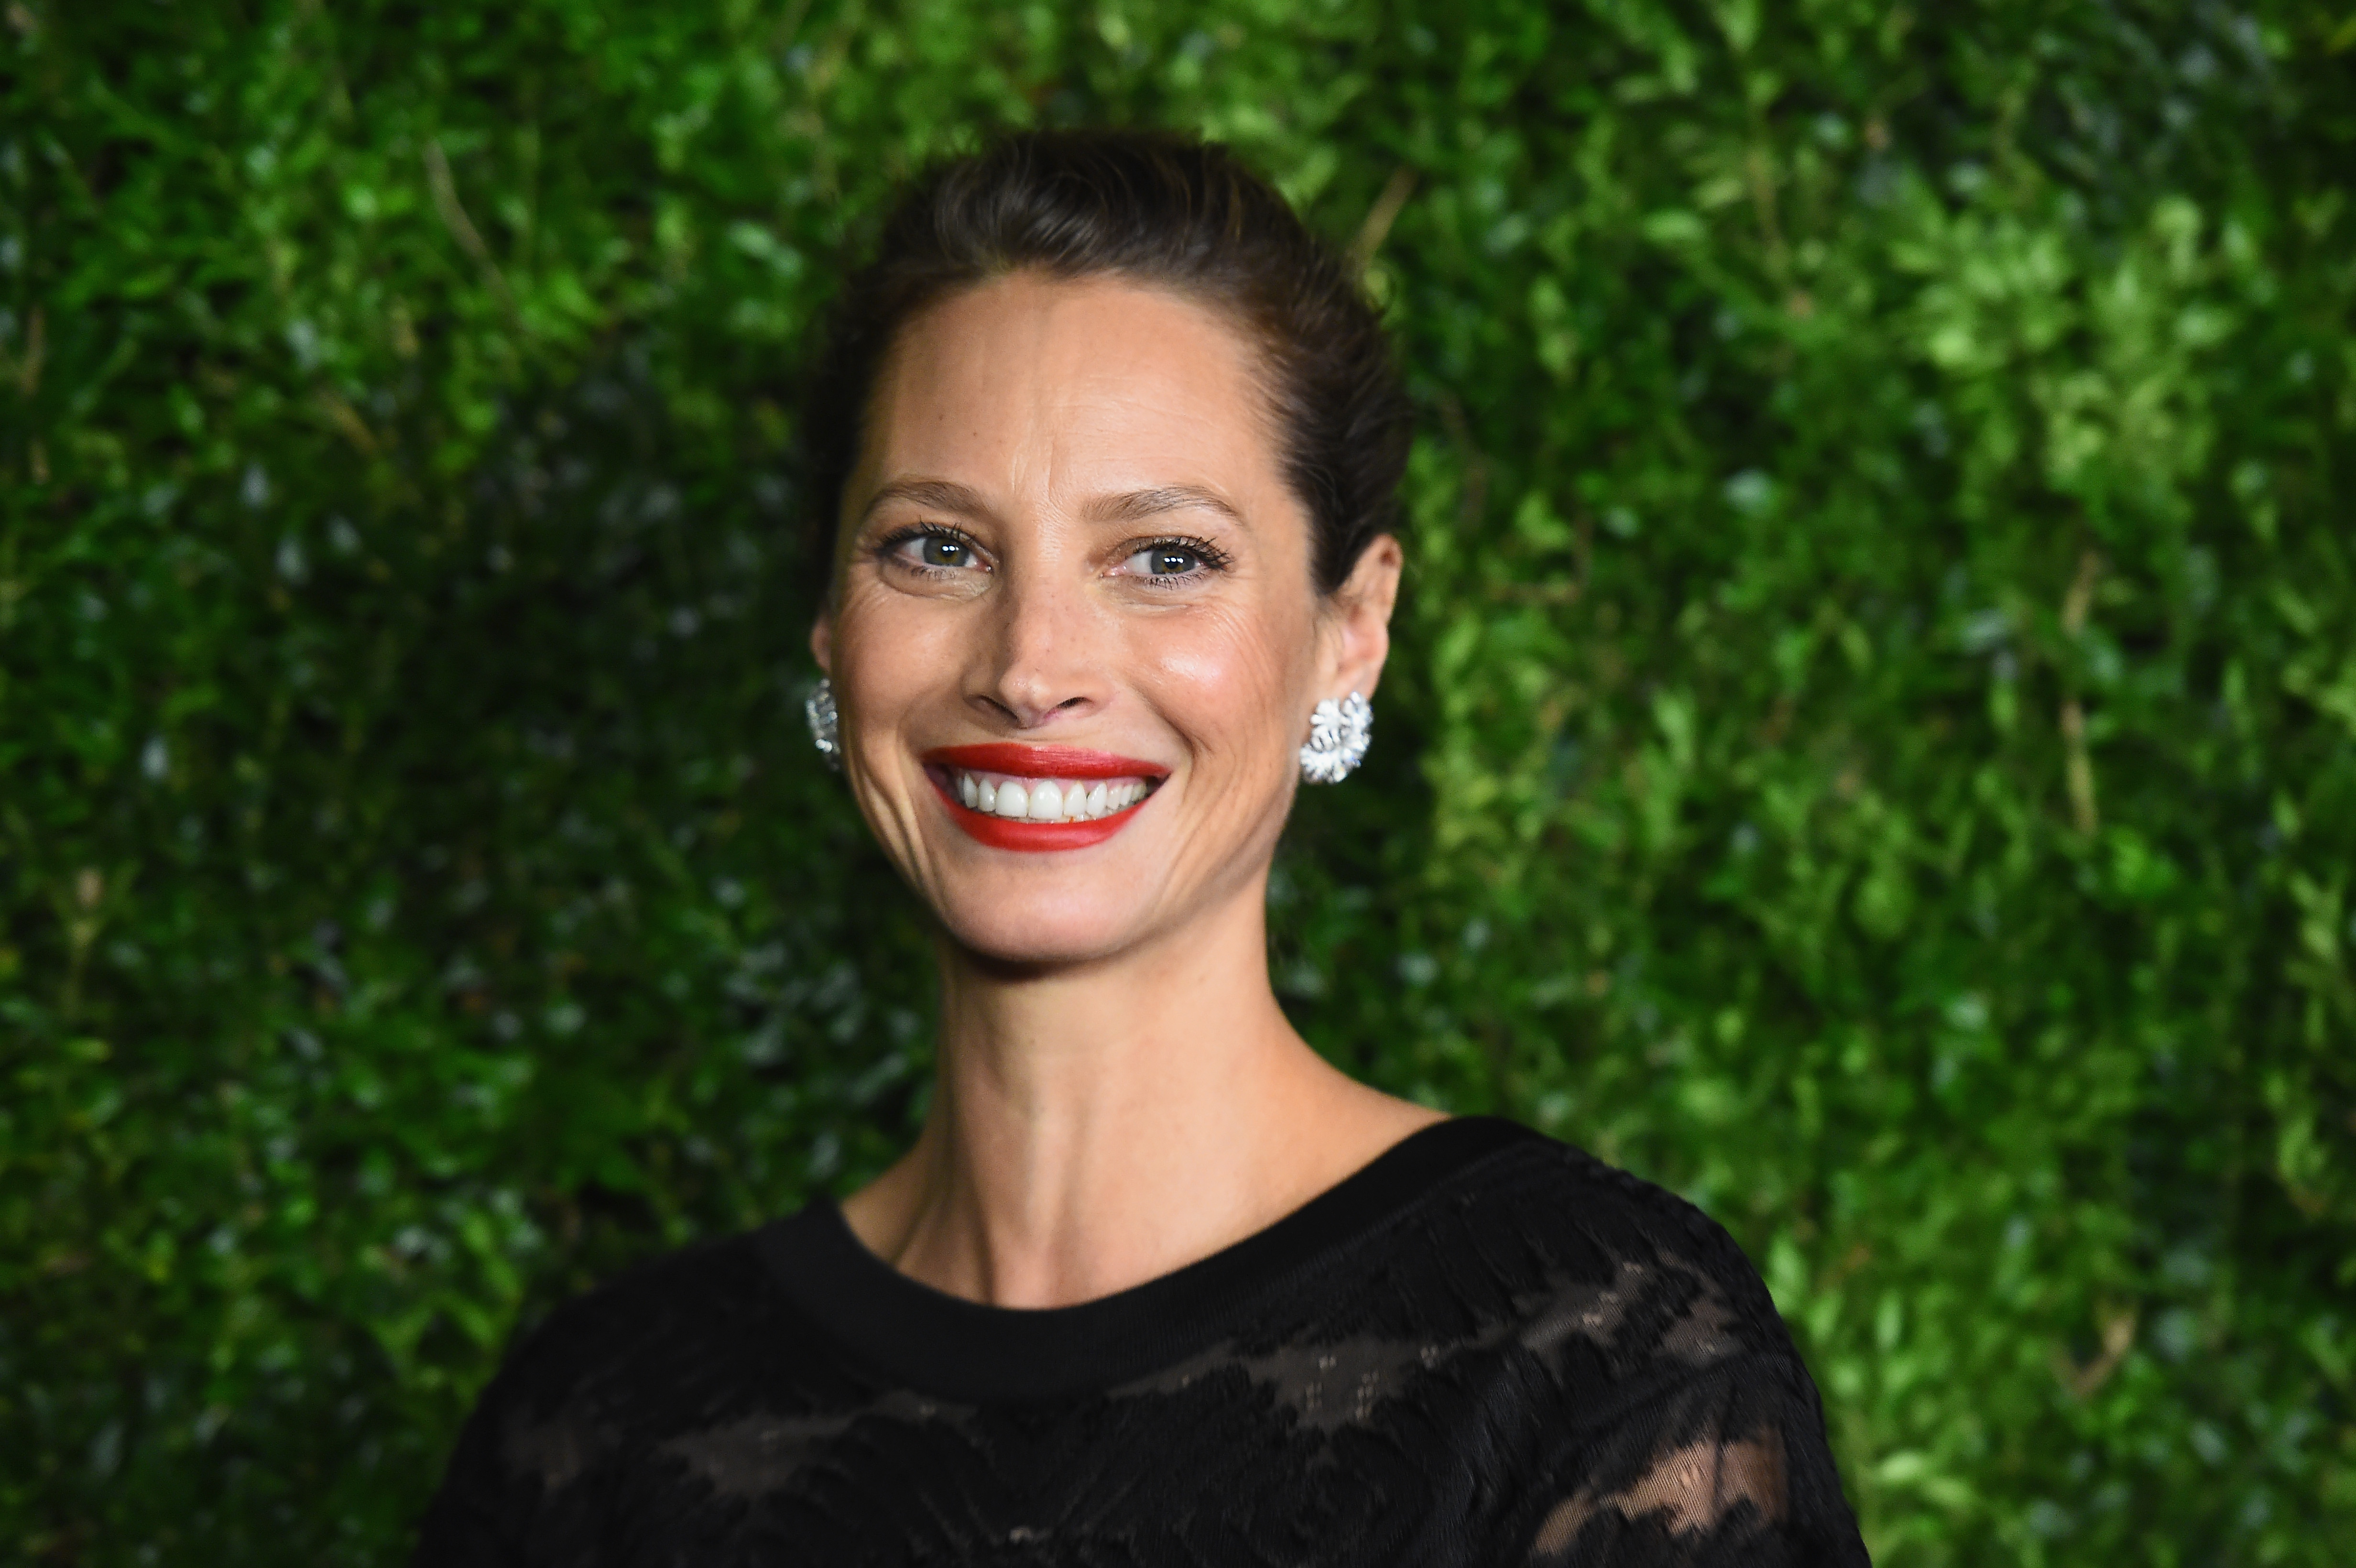 Christy Turlington returns to modeling after 25 years at 50 to walk the  runway at NYFW